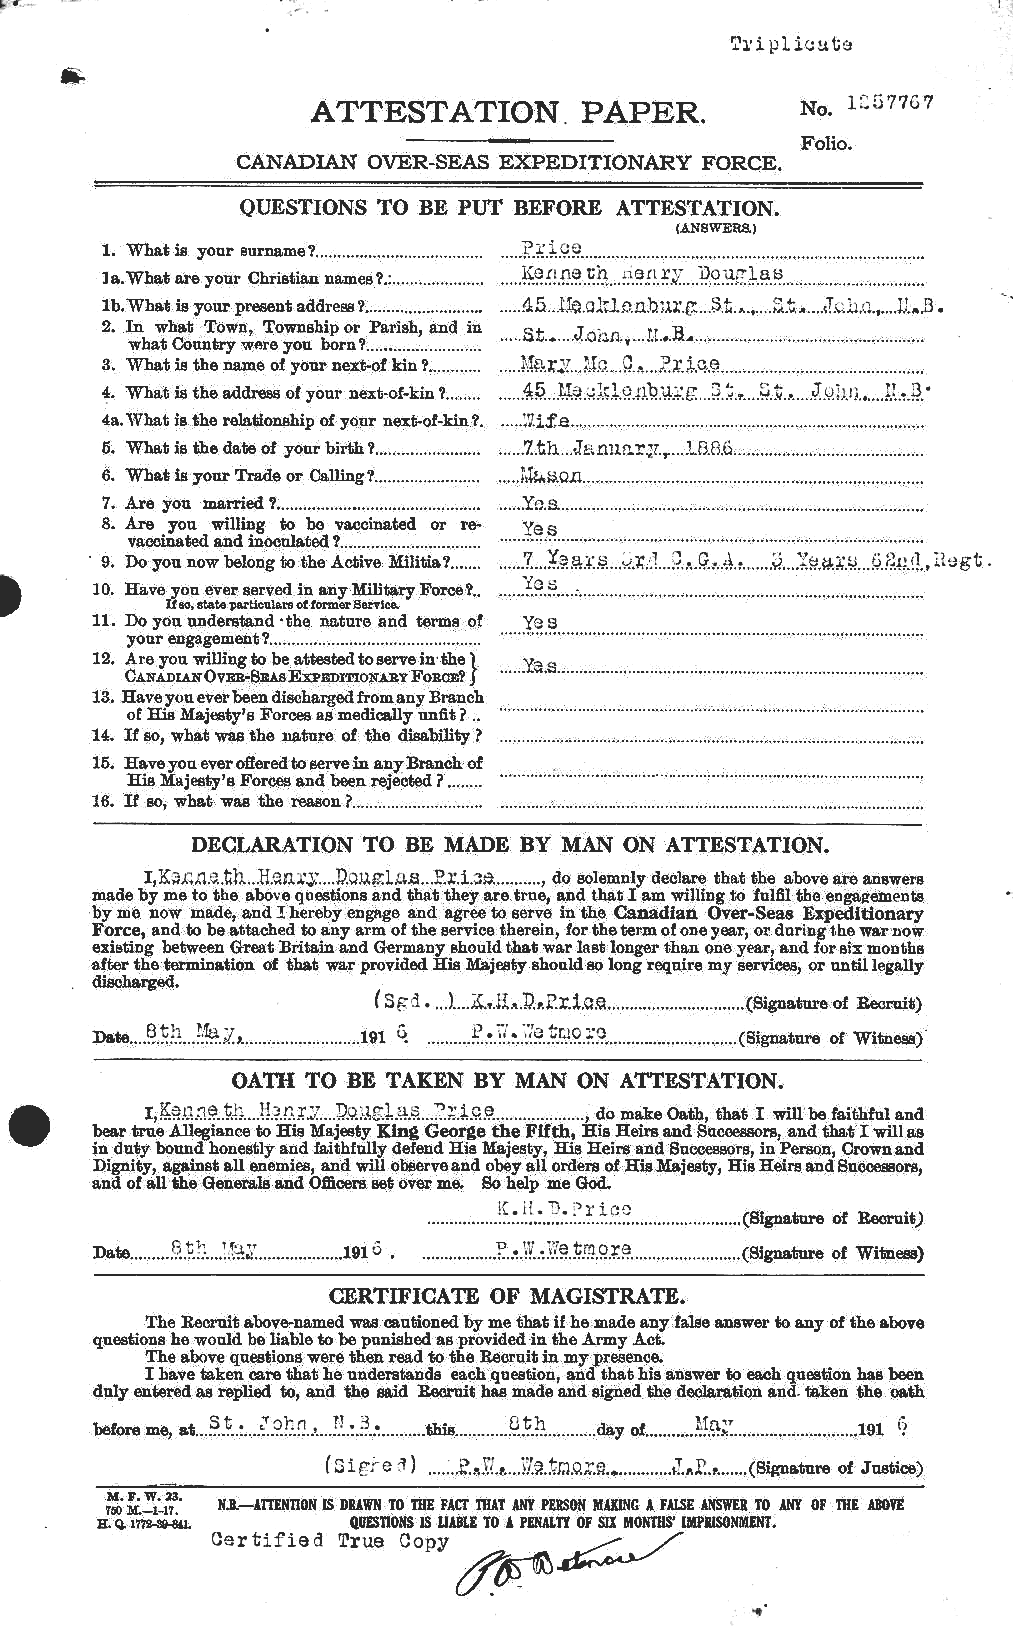 Personnel Records of the First World War - CEF 587271a